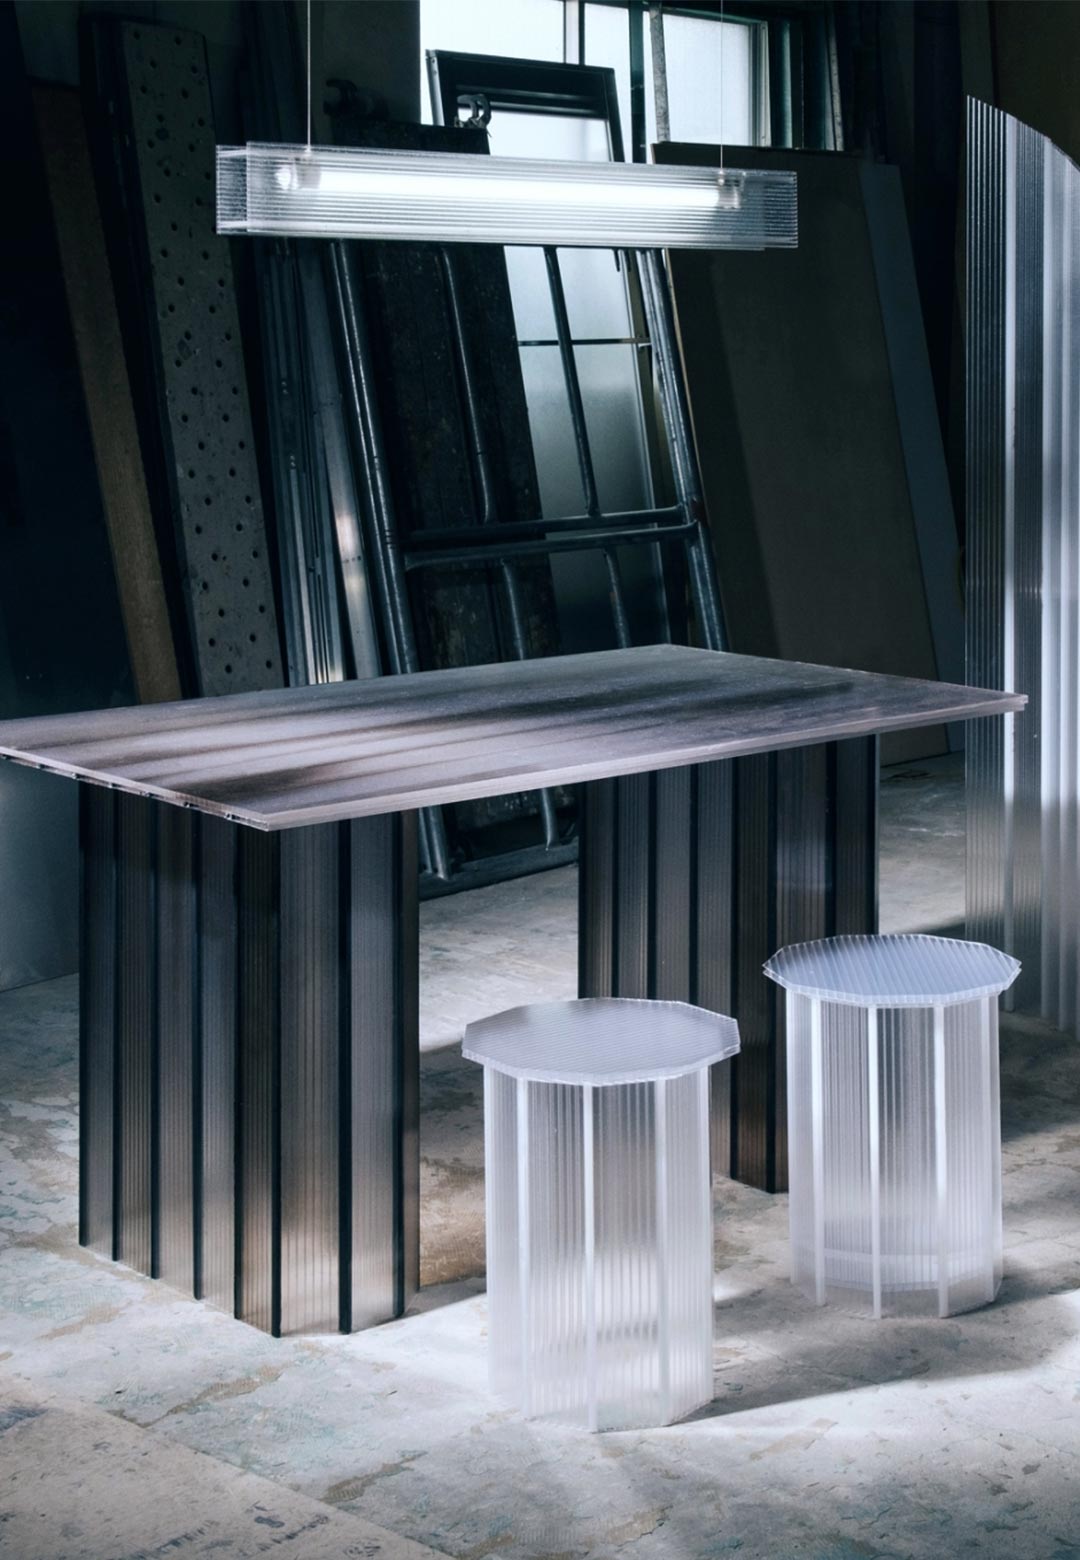 Furniture collection BORDER’s ice-like aesthetic upcycles hollow polycarbonate